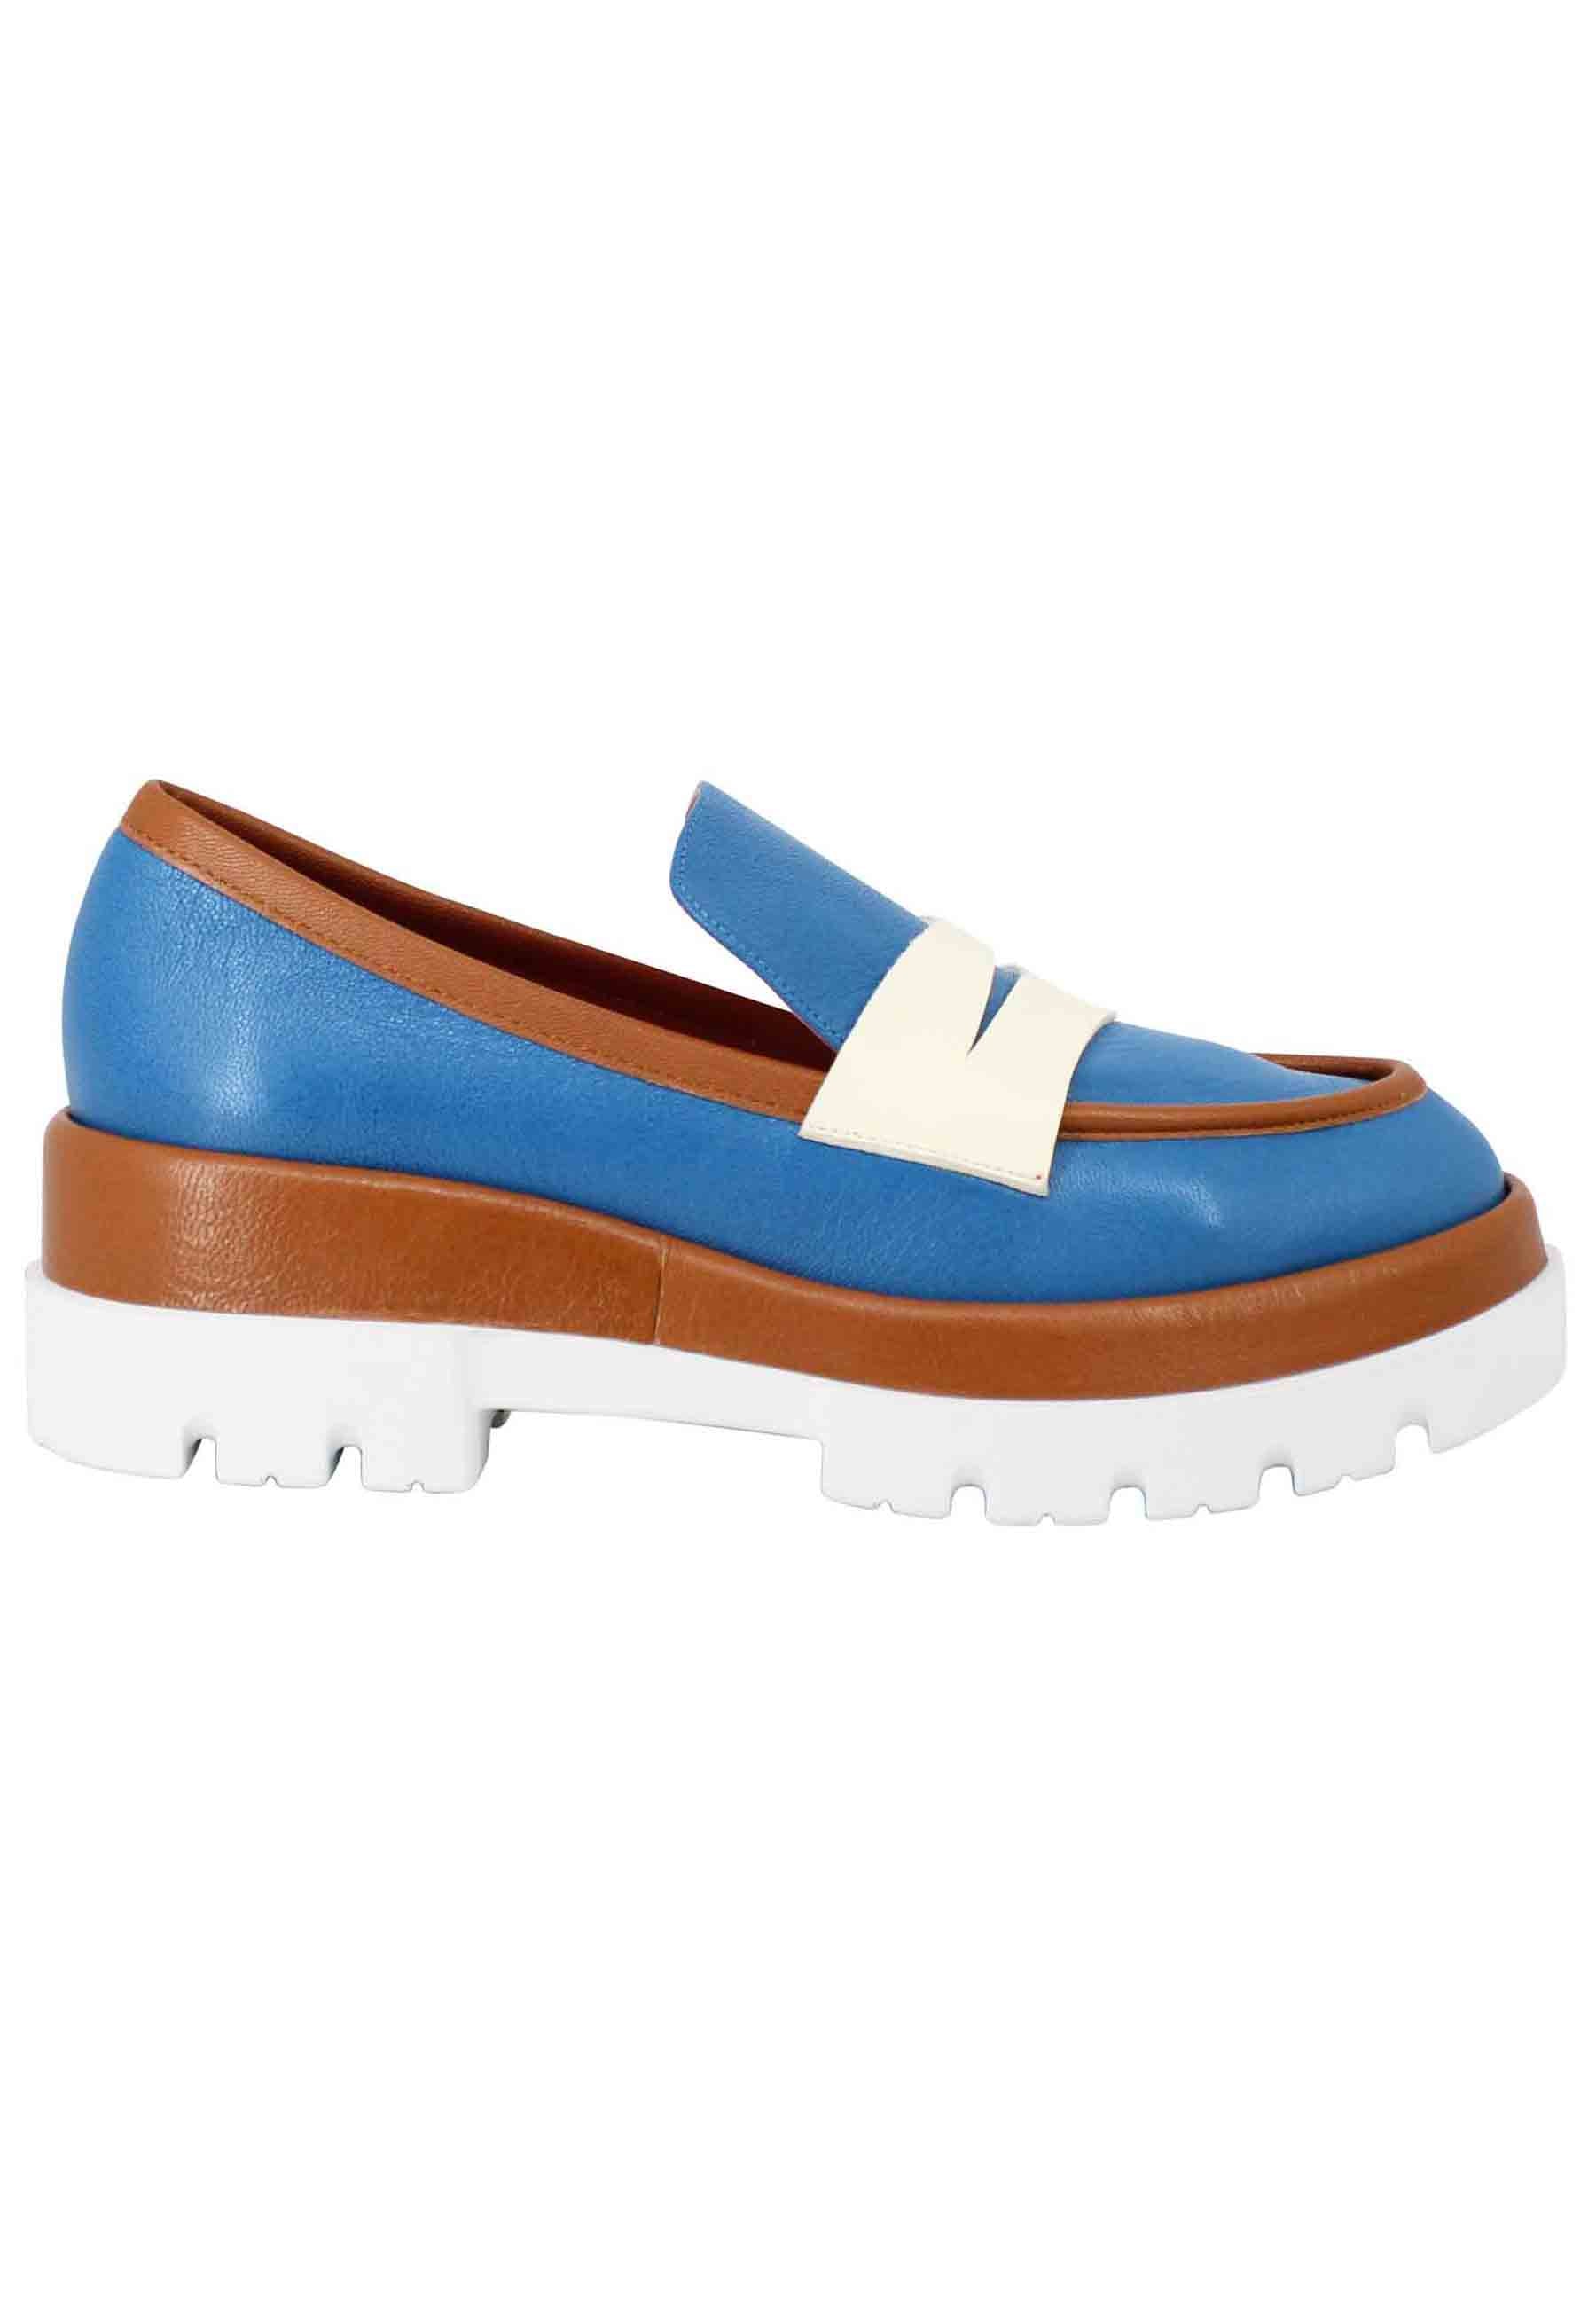 Women's blue leather moccasins with wedge and tan leather inserts